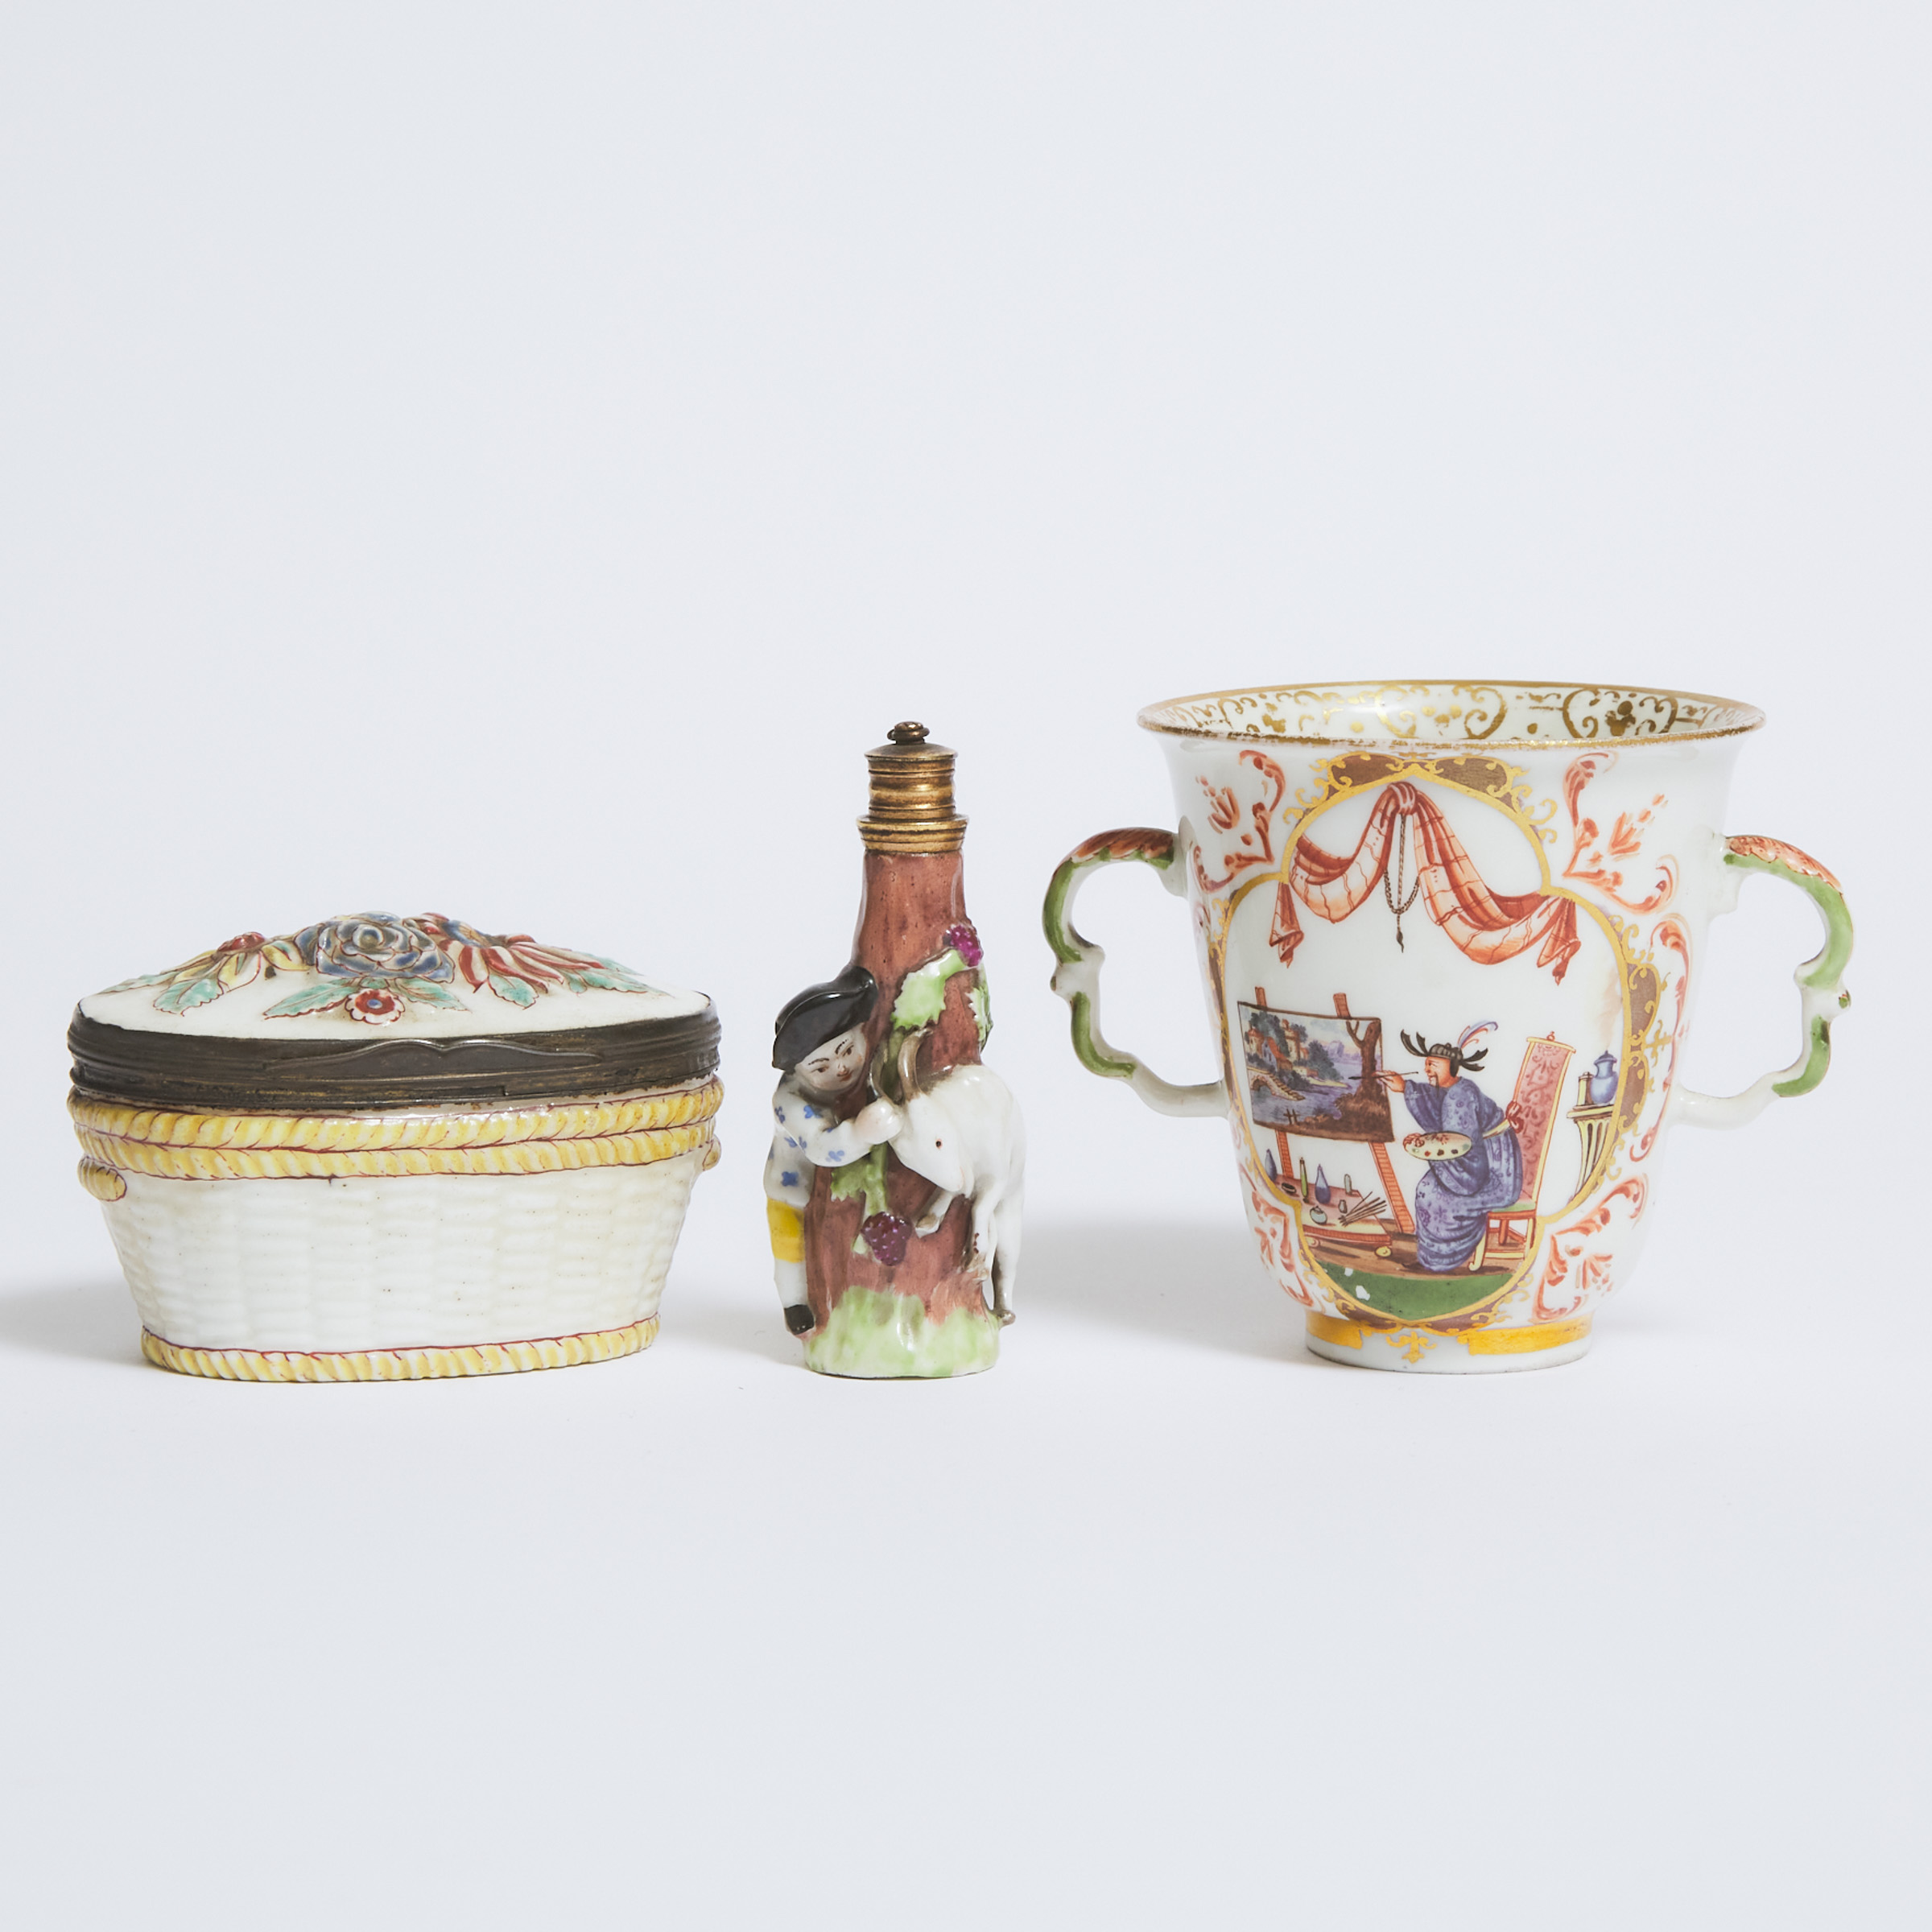 German Porcelain Chinoiserie Trembleuse Cup, French Boy and Goat Perfume Bottle, and a Moulded Oval Box, 18th/19th century